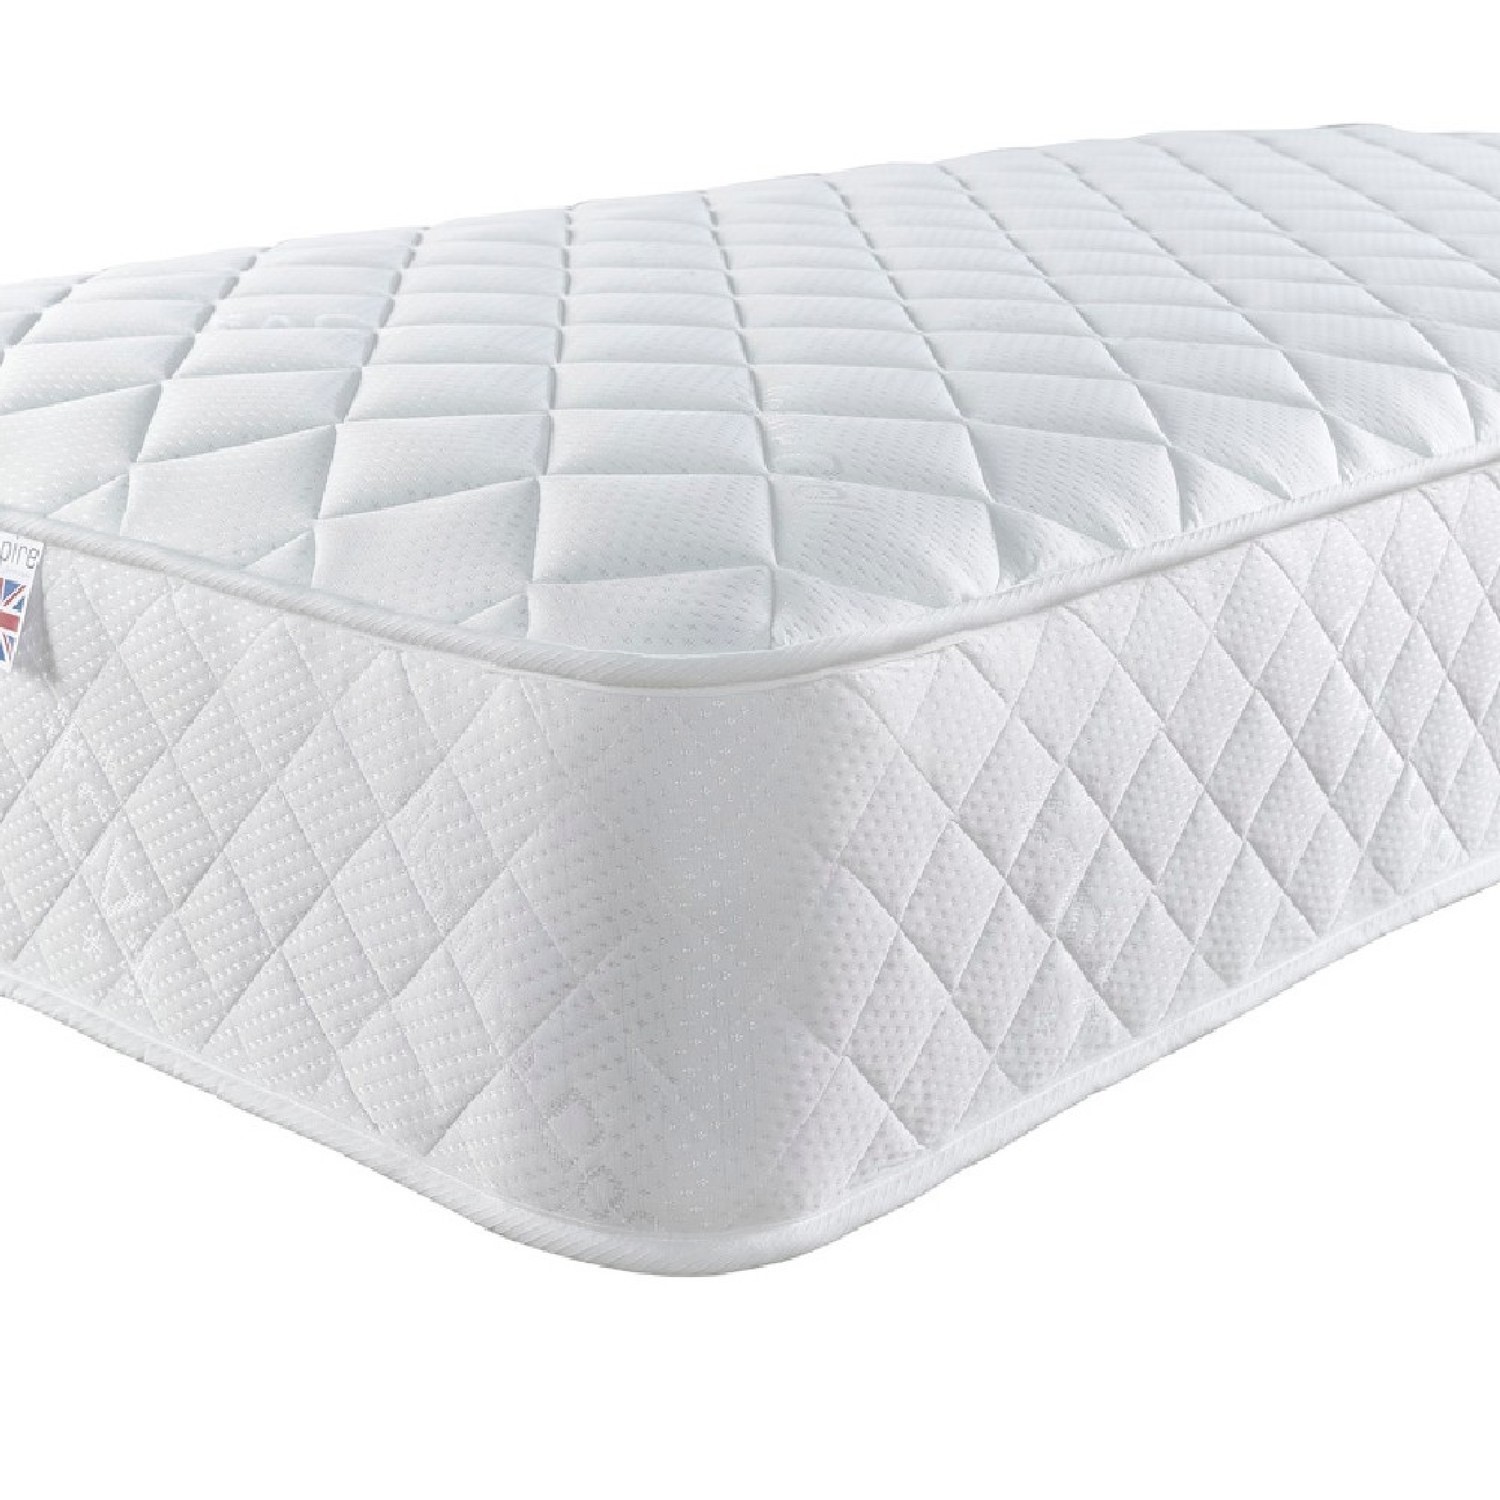 Aspire cooling open coil spring mattress - single